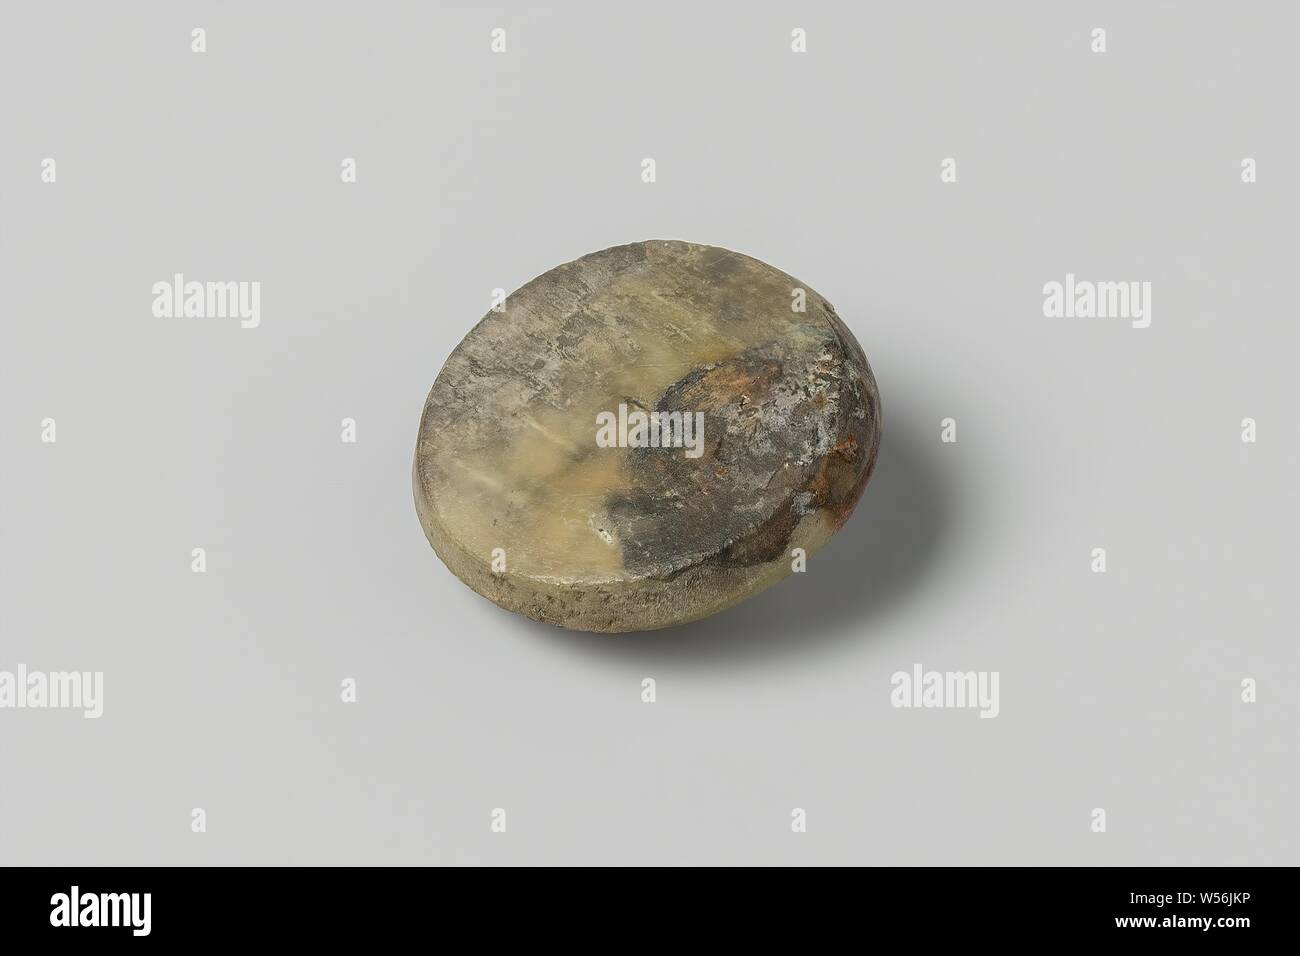 Button from the wreck of the East India dealer Hollandia, Knoop. (1) flat, plain (1.5d, 0.2t), Annet, Dutch East India Company, Hollandia (ship), anonymous, Netherlands, 1700 - in or before 13-Aug-1743, bone (material), h 0.4 cm × d 1.5 cm Stock Photo